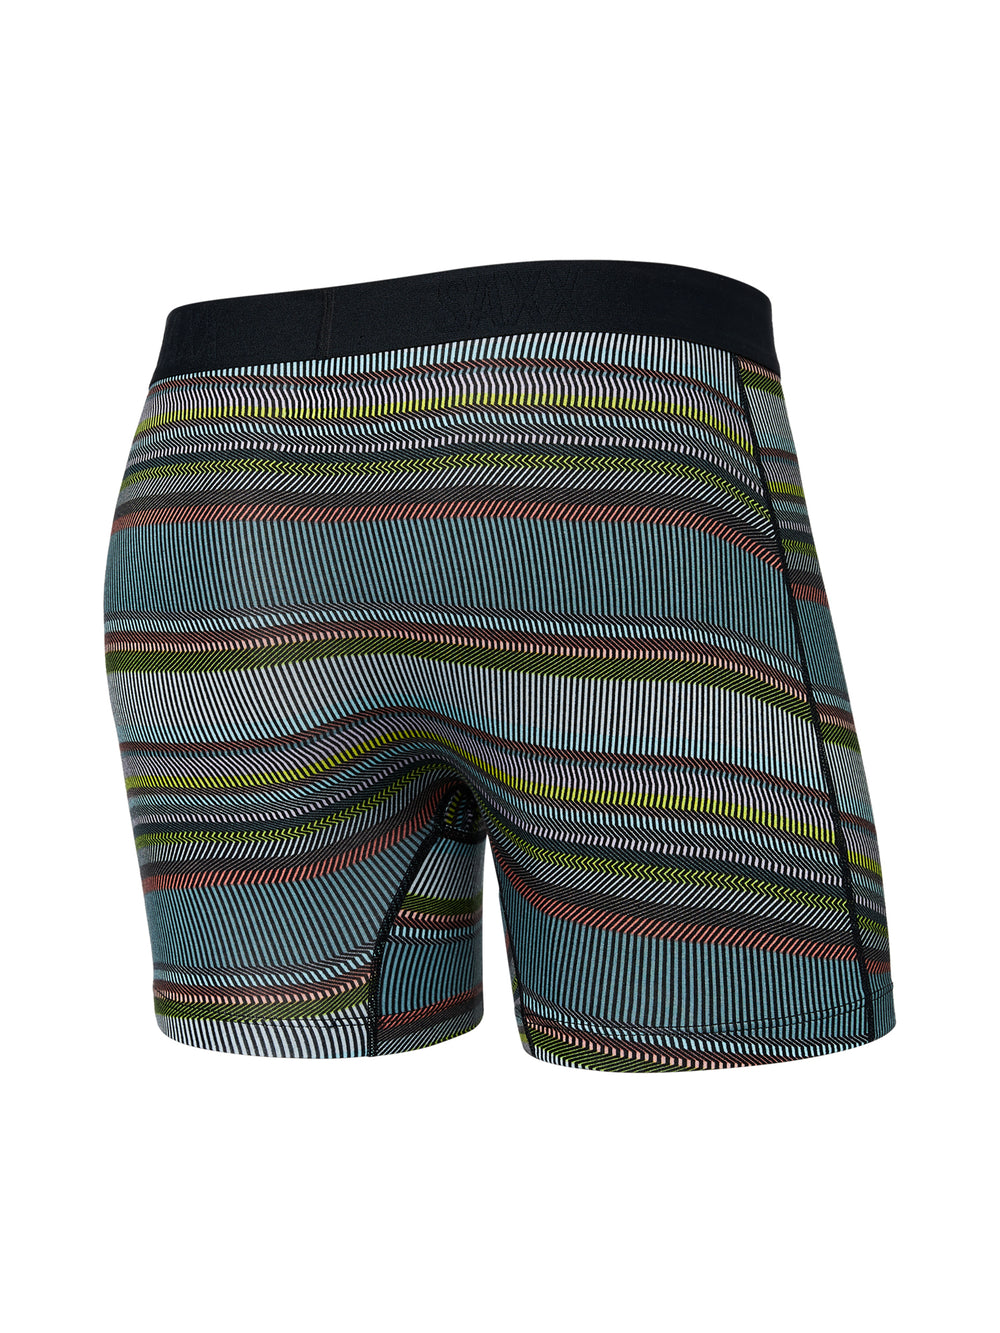 Boathouse SAXX ULTRA 3PCK BOXER BRIEF - CLEARANCE